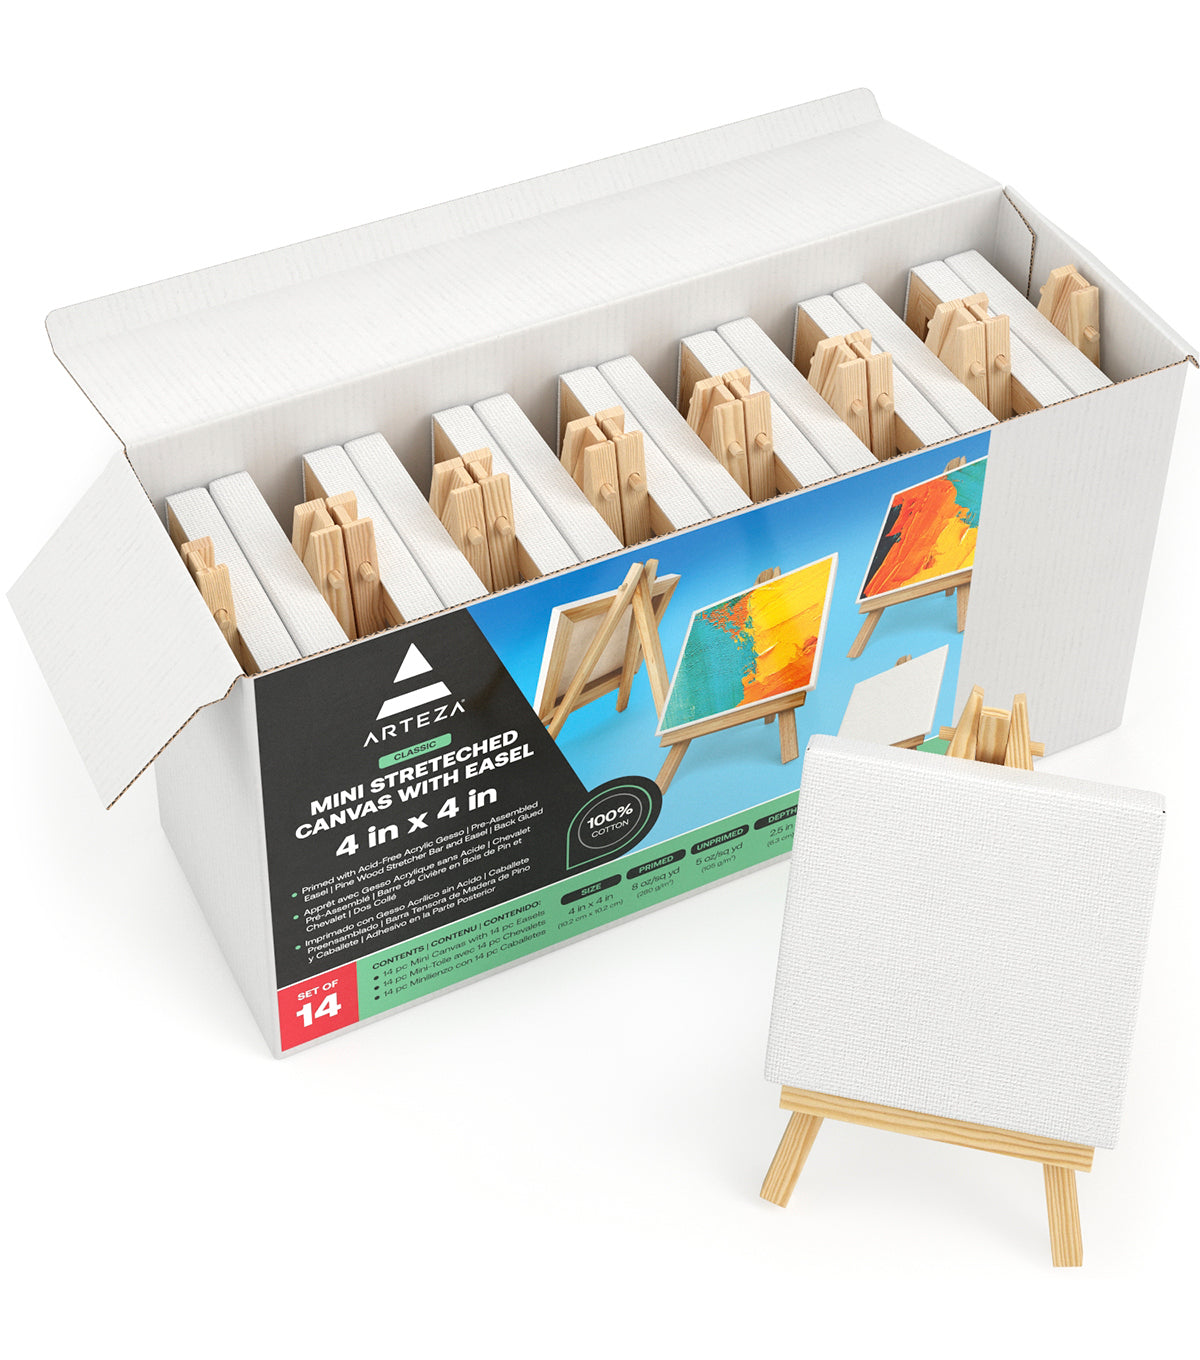 Mini Canvases 18 Pack, Cridoz Small Painting Canvas with Mini Easel 4x4  Inches Art Canvases Painting Kit for Kids Teenagers Acrylic Pouring Oil  Water Color